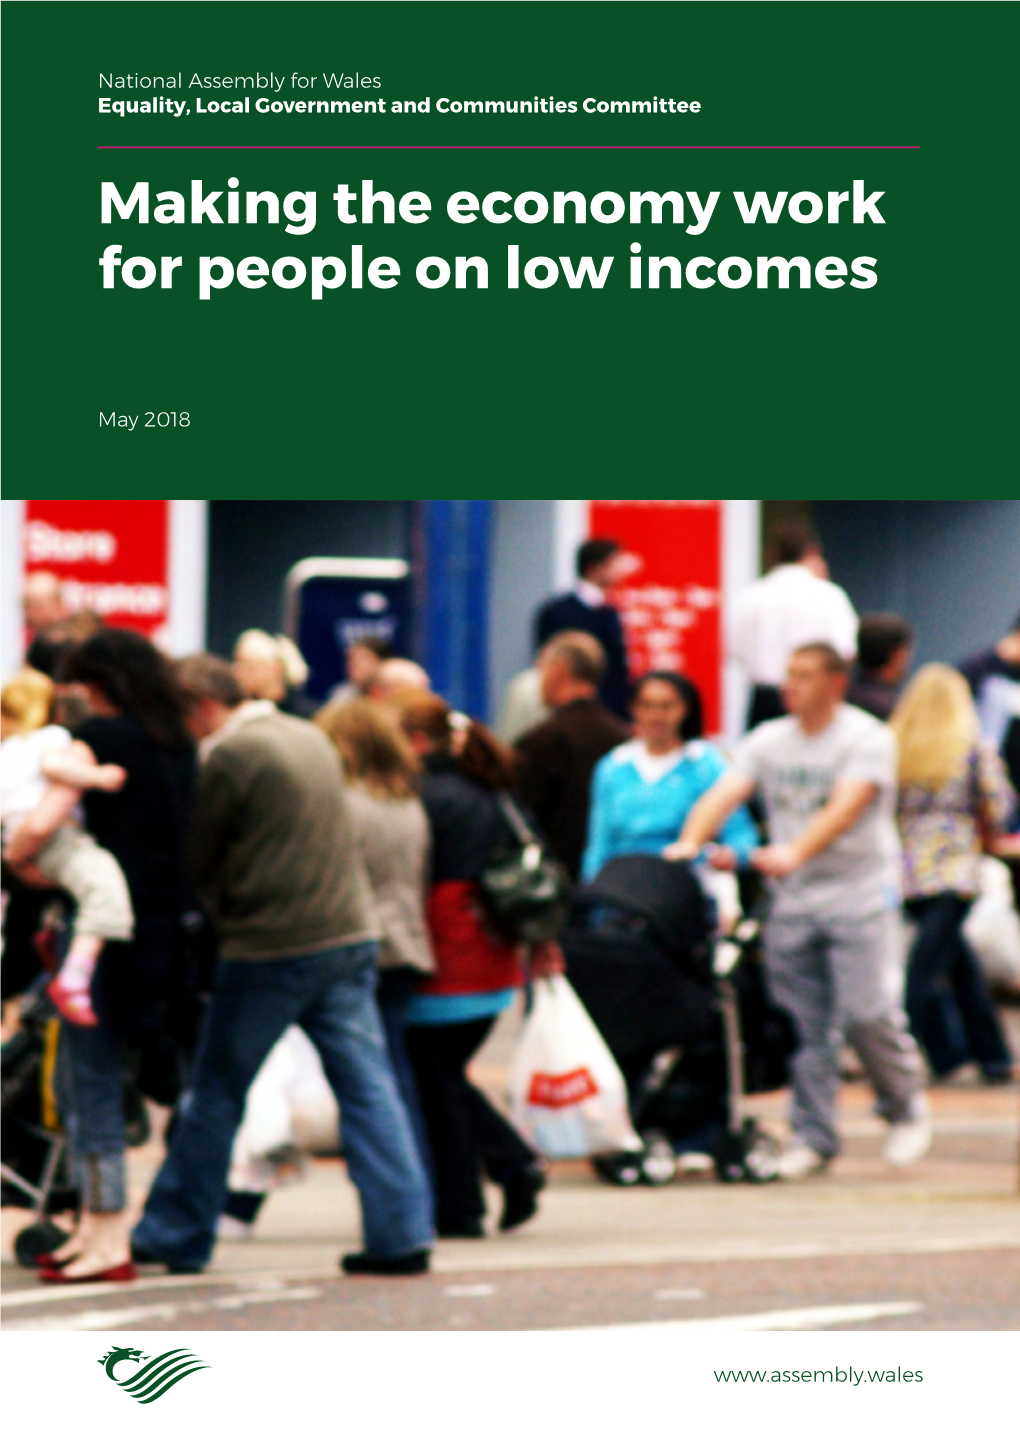 Making the Economy Work for People on Low Incomes